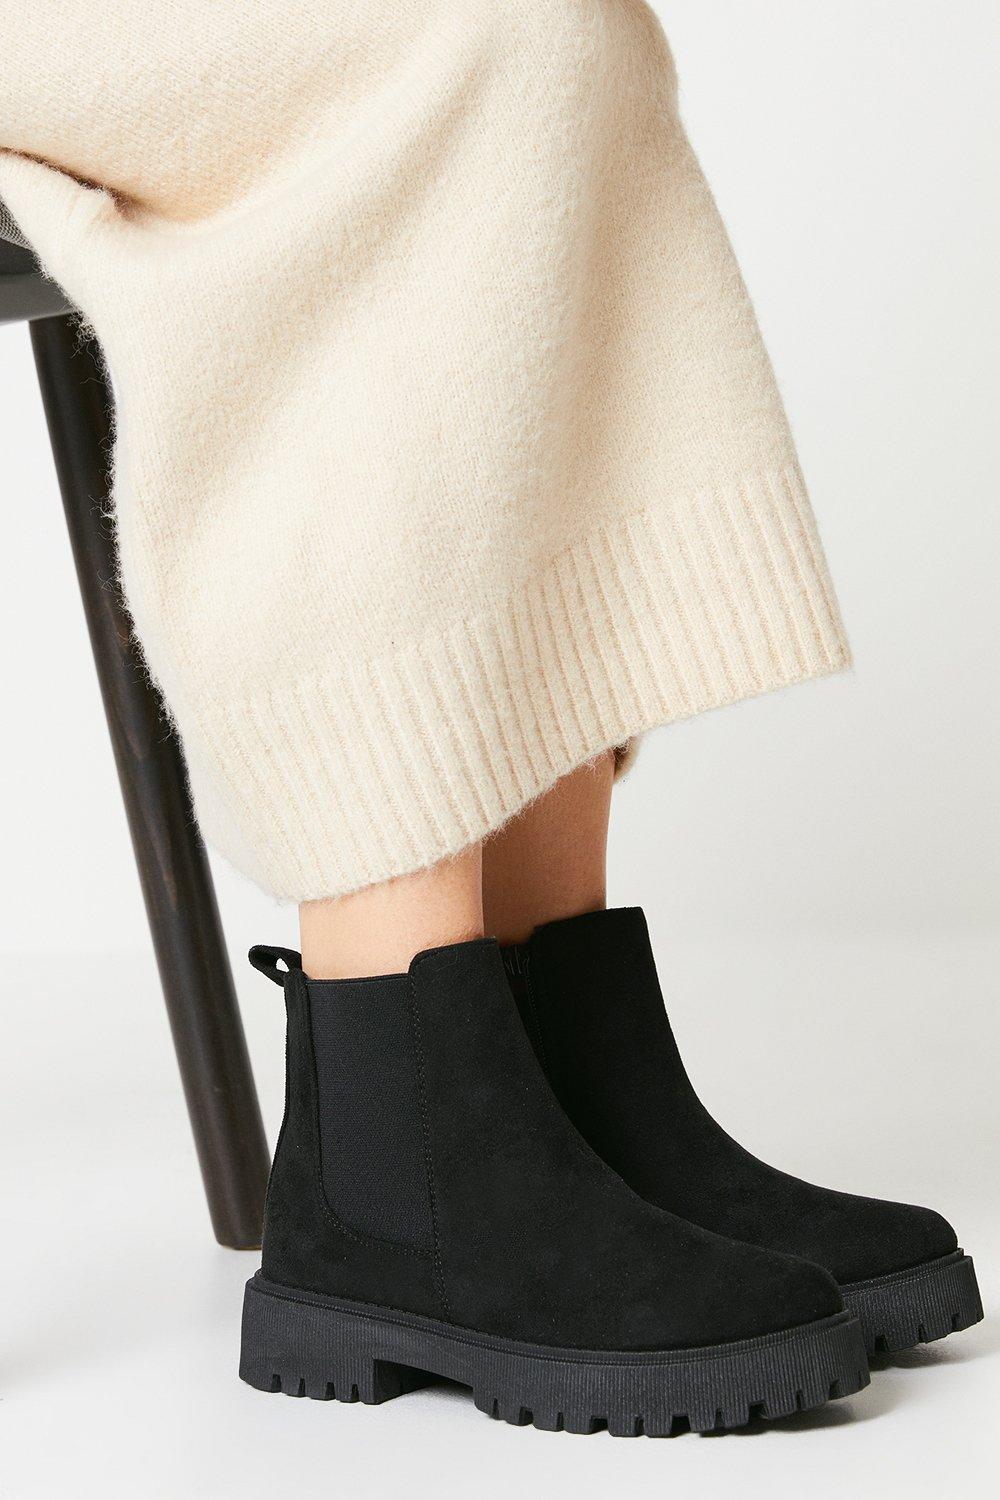 Jinx Cleated Casual Chelsea Ankle Boots